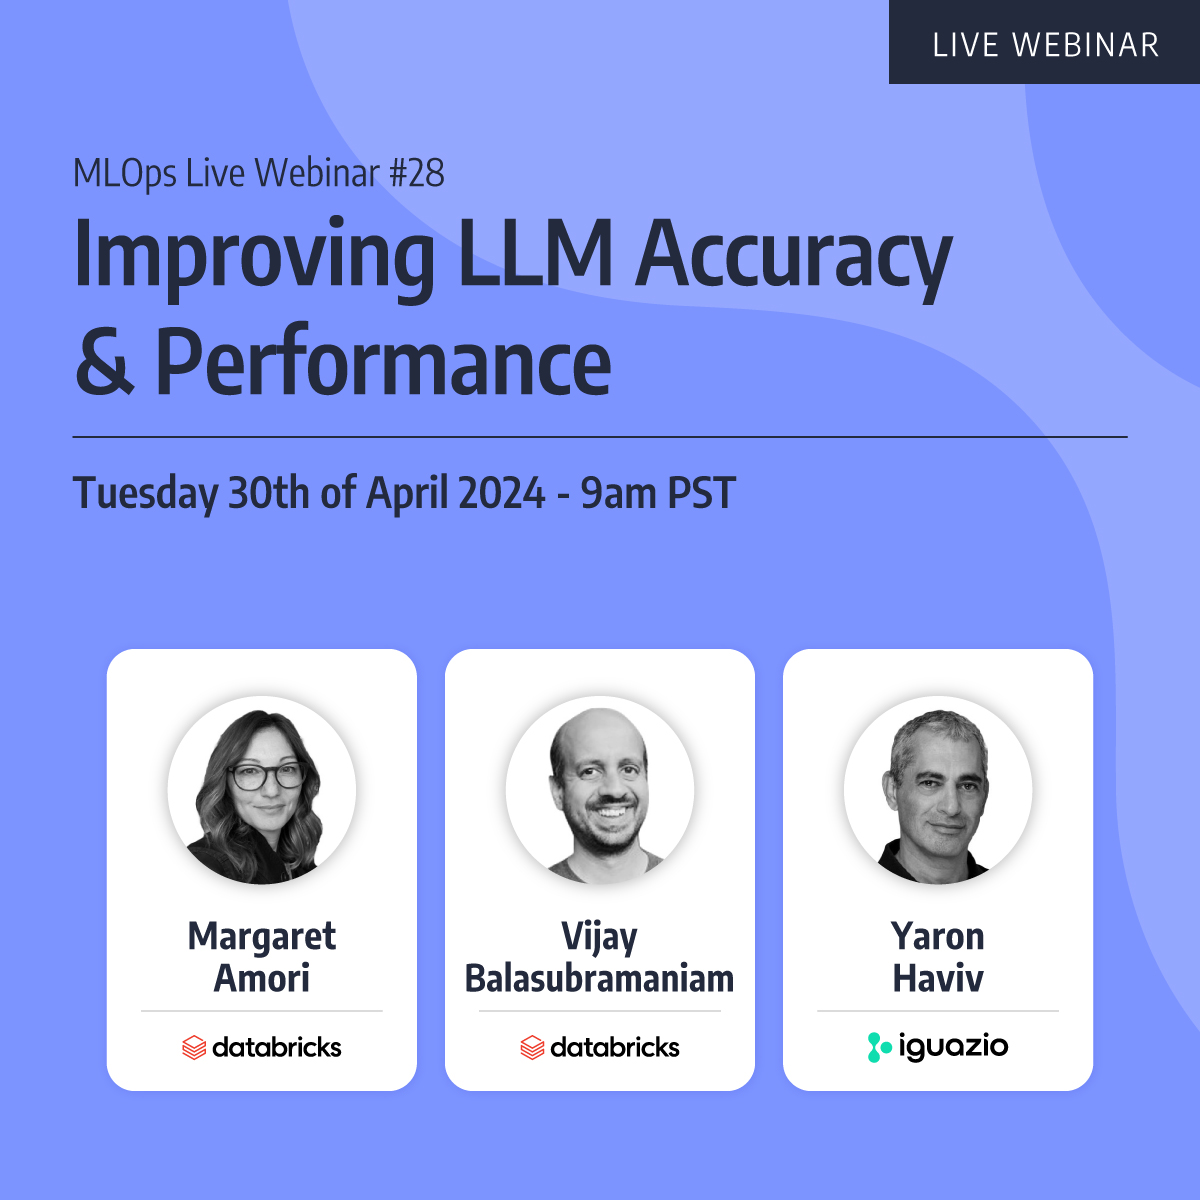 MLOps Live #28 - Improving LLM Accuracy & Performance